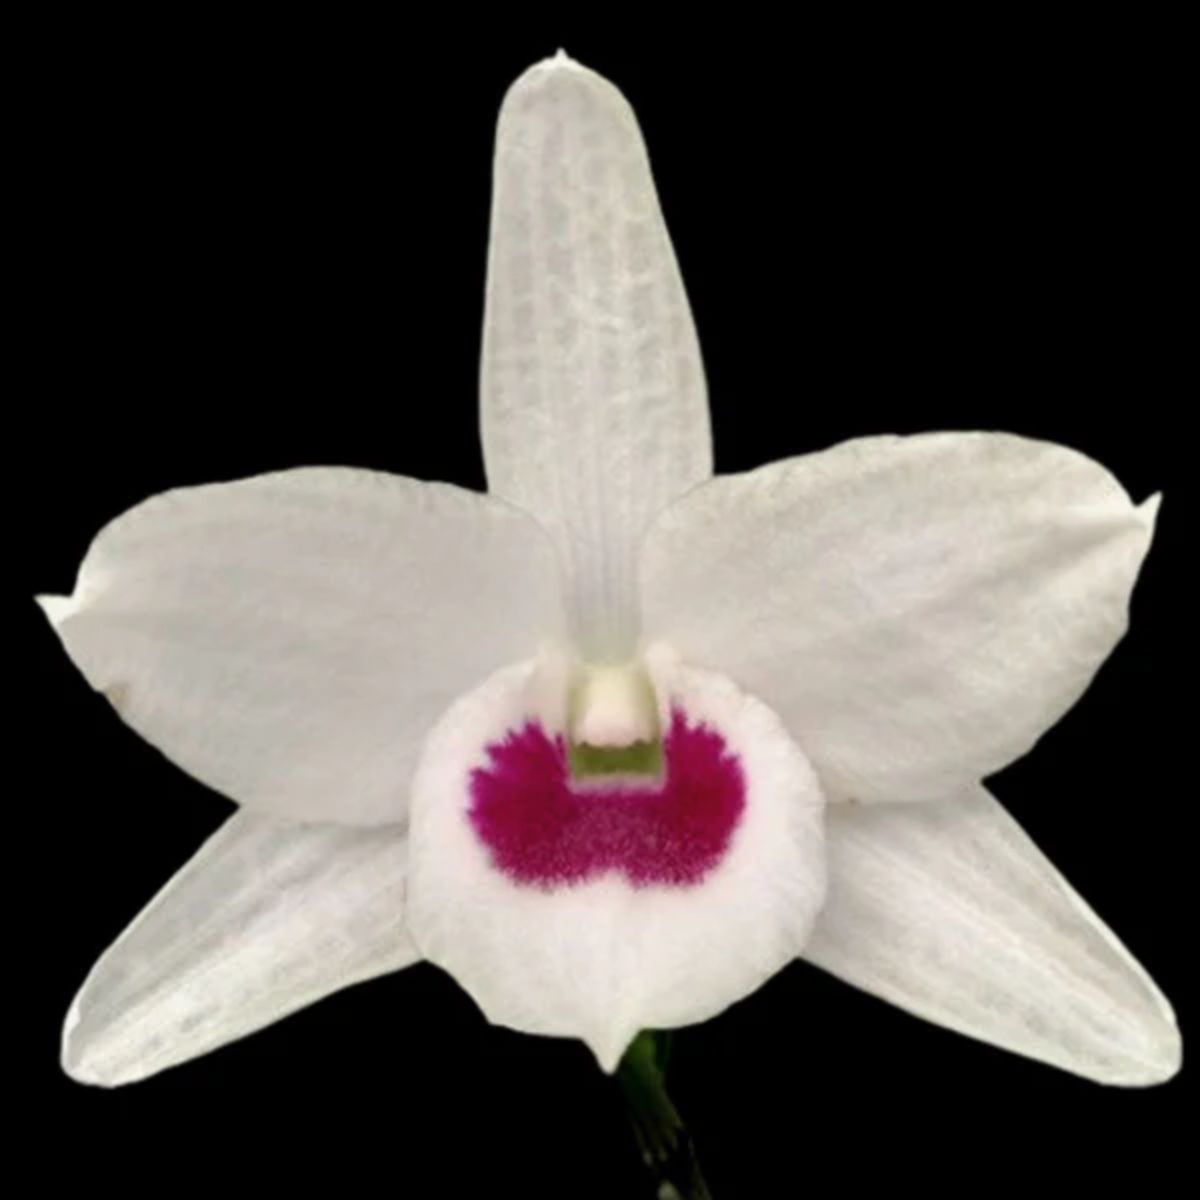 Denbrobium Nobile Wattanabe White Orchid - Delicate white petals with graceful elegance